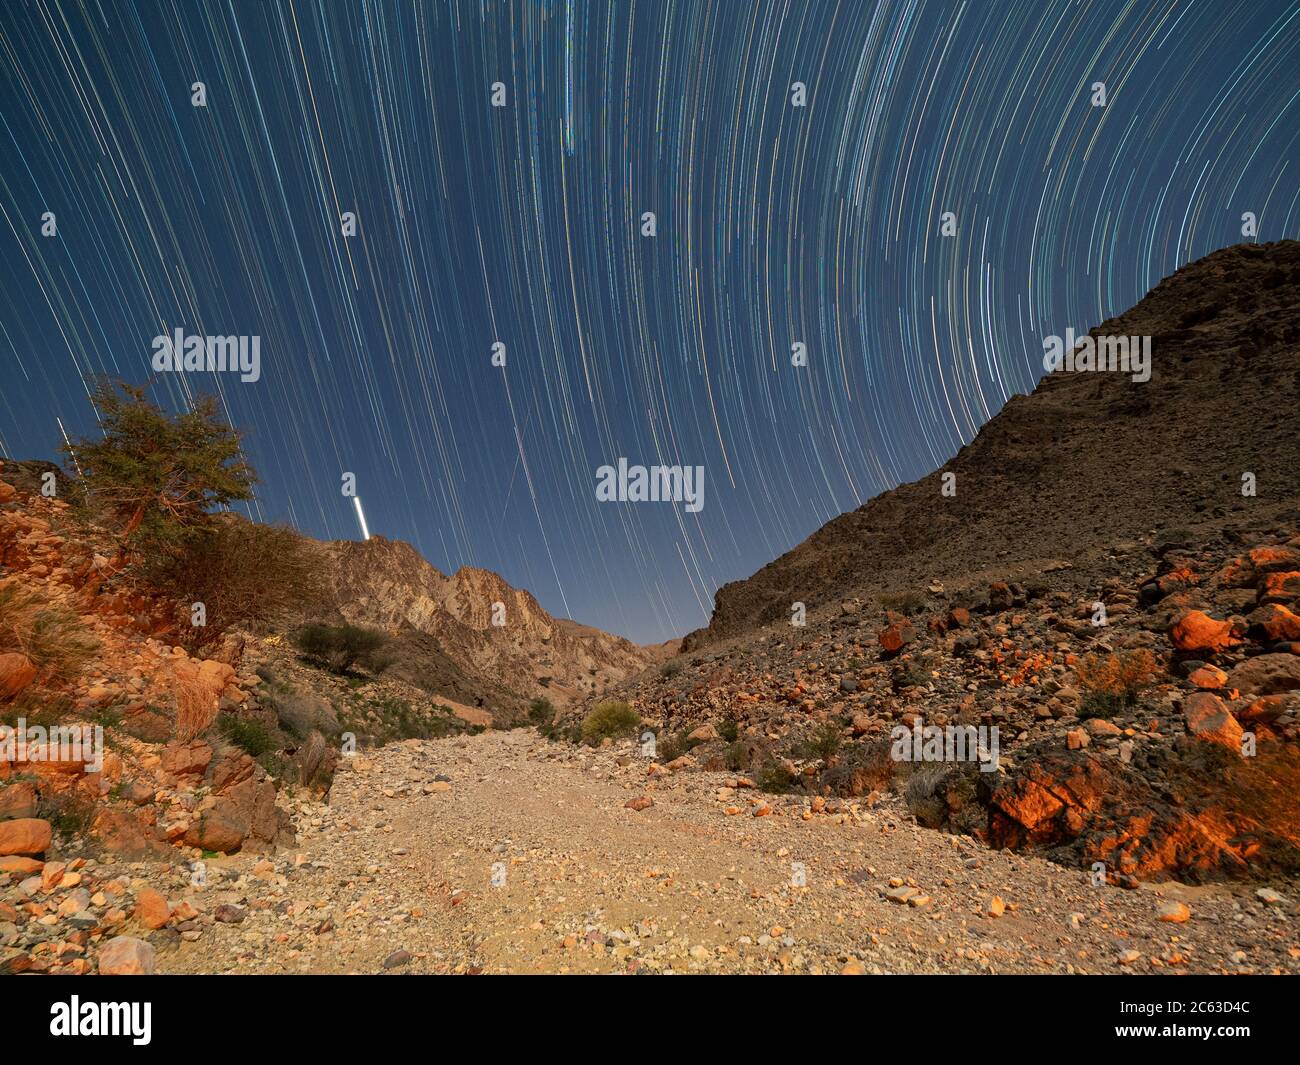 Star trails at night in Wadi Al Arbeen, Sultanate of Oman. Stock Photo